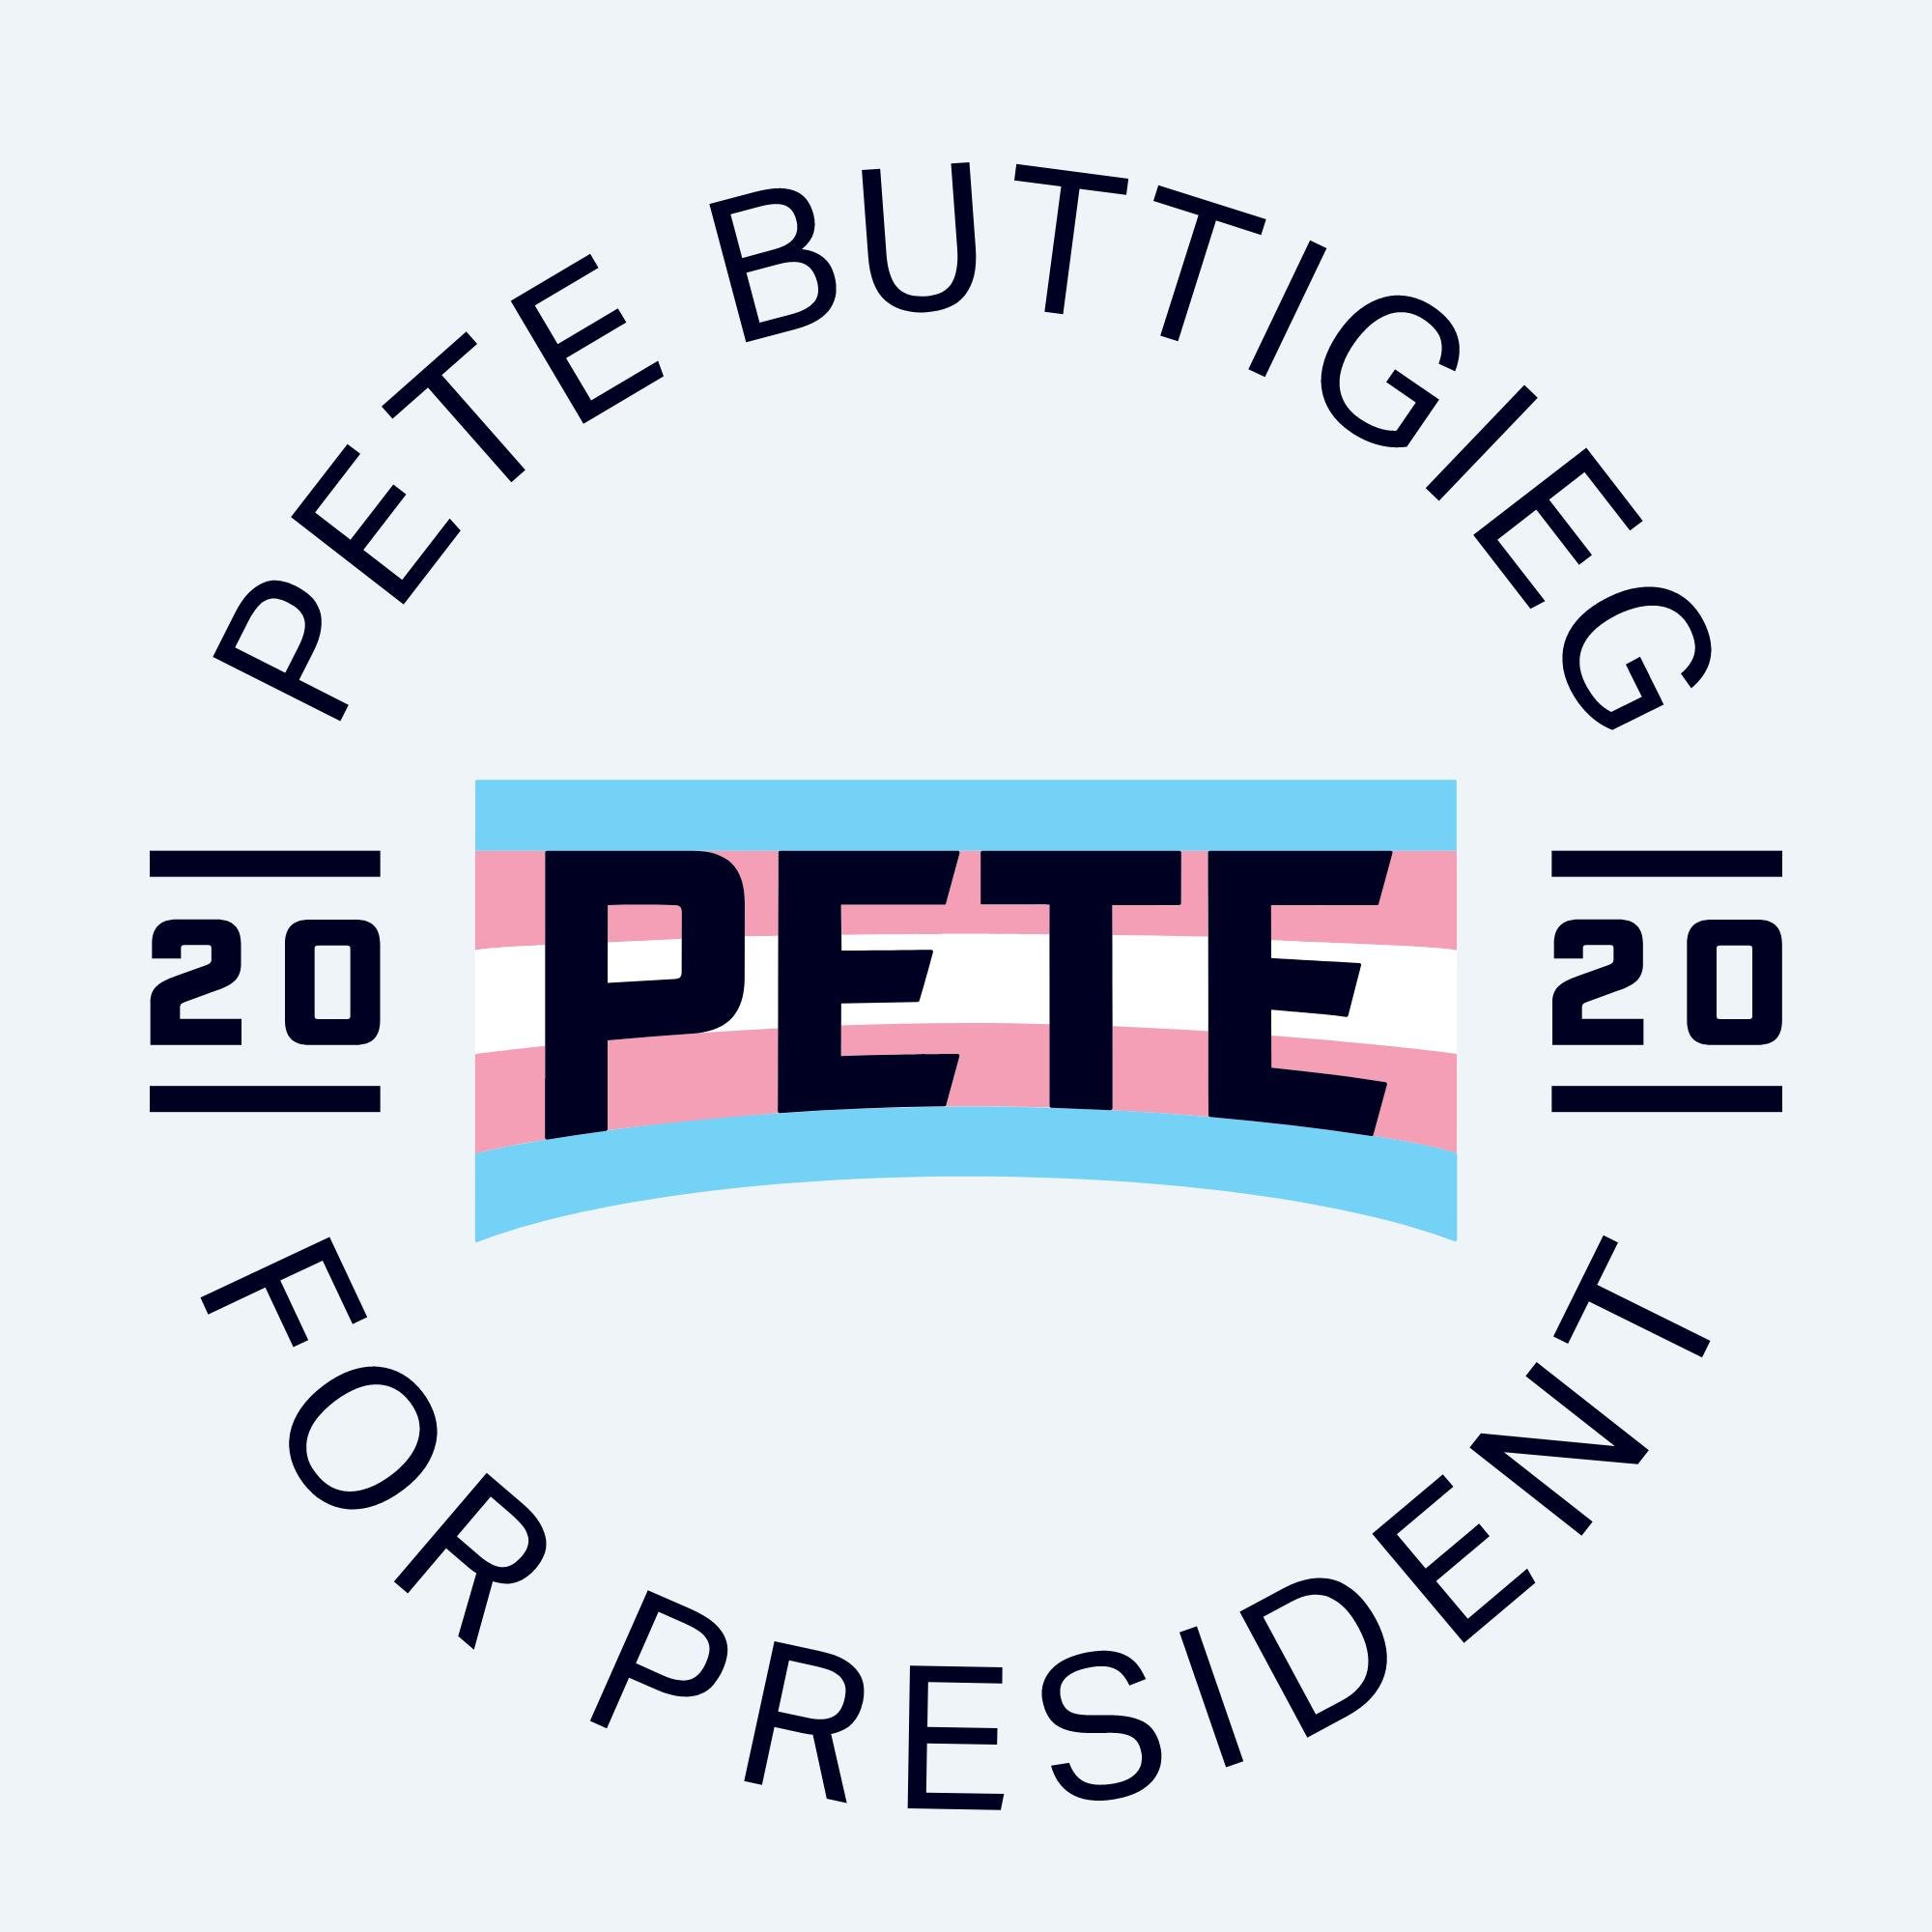 oliver | he/him
team pete, team biden

alright kids let's do this thing.